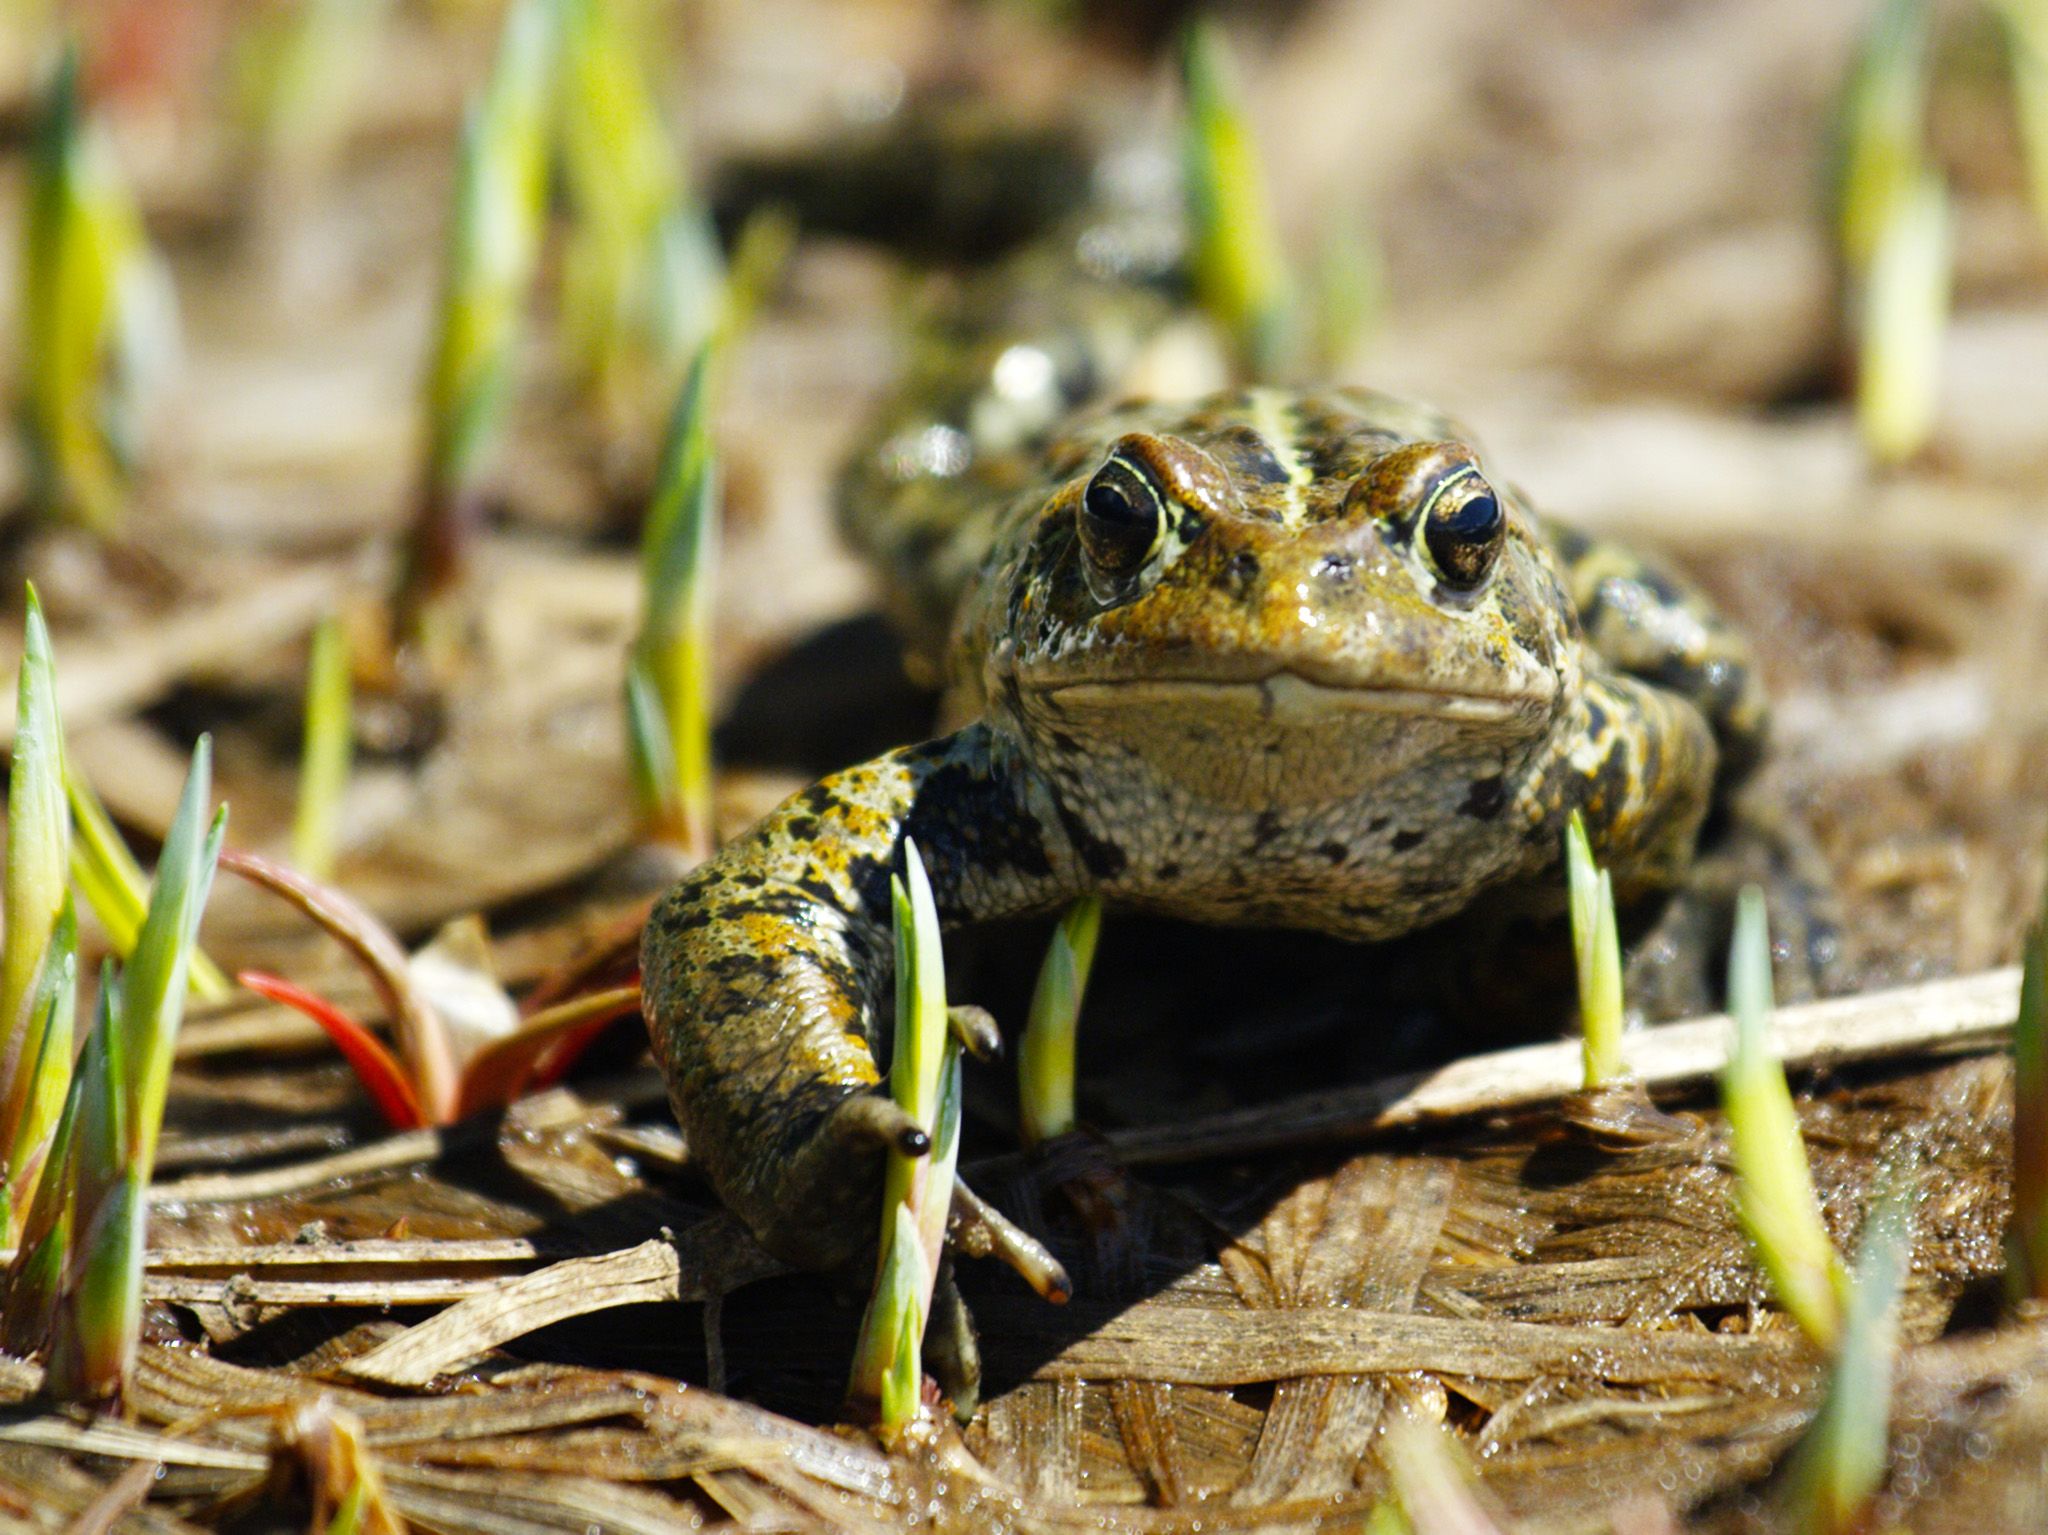 Mt Rainier National Park, WA:  A western toad.  This image is from America's Wild Frontier. [Photo of the day - March 2018]